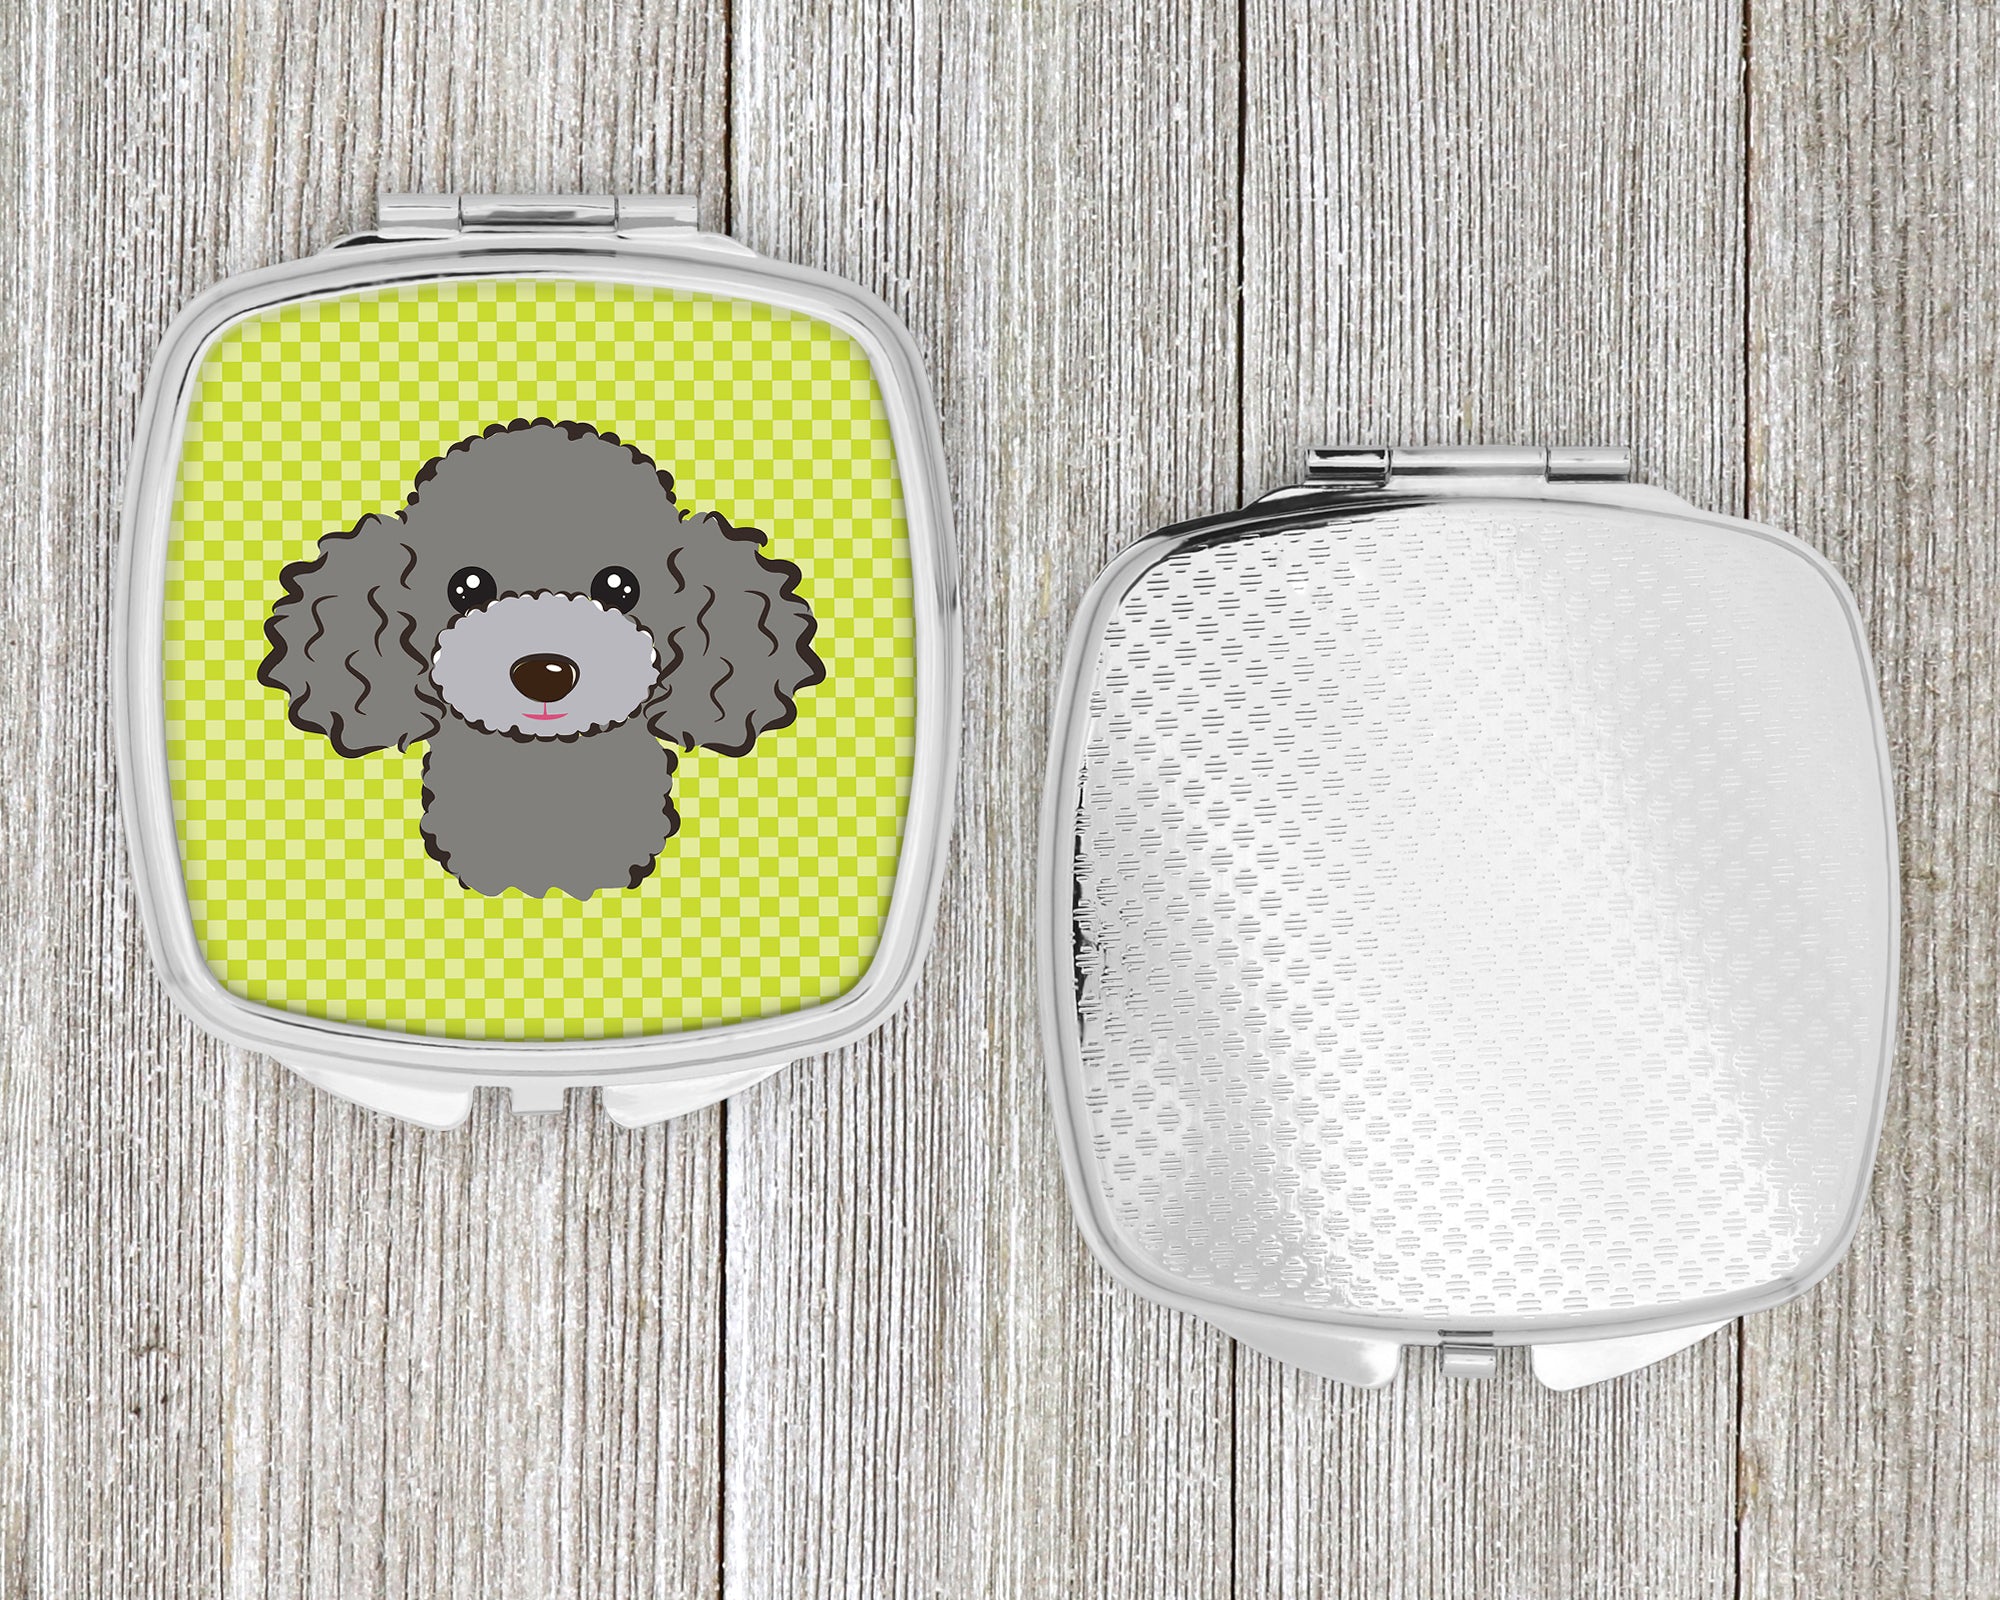 Checkerboard Lime Green Silver Gray Poodle Compact Mirror BB1321SCM